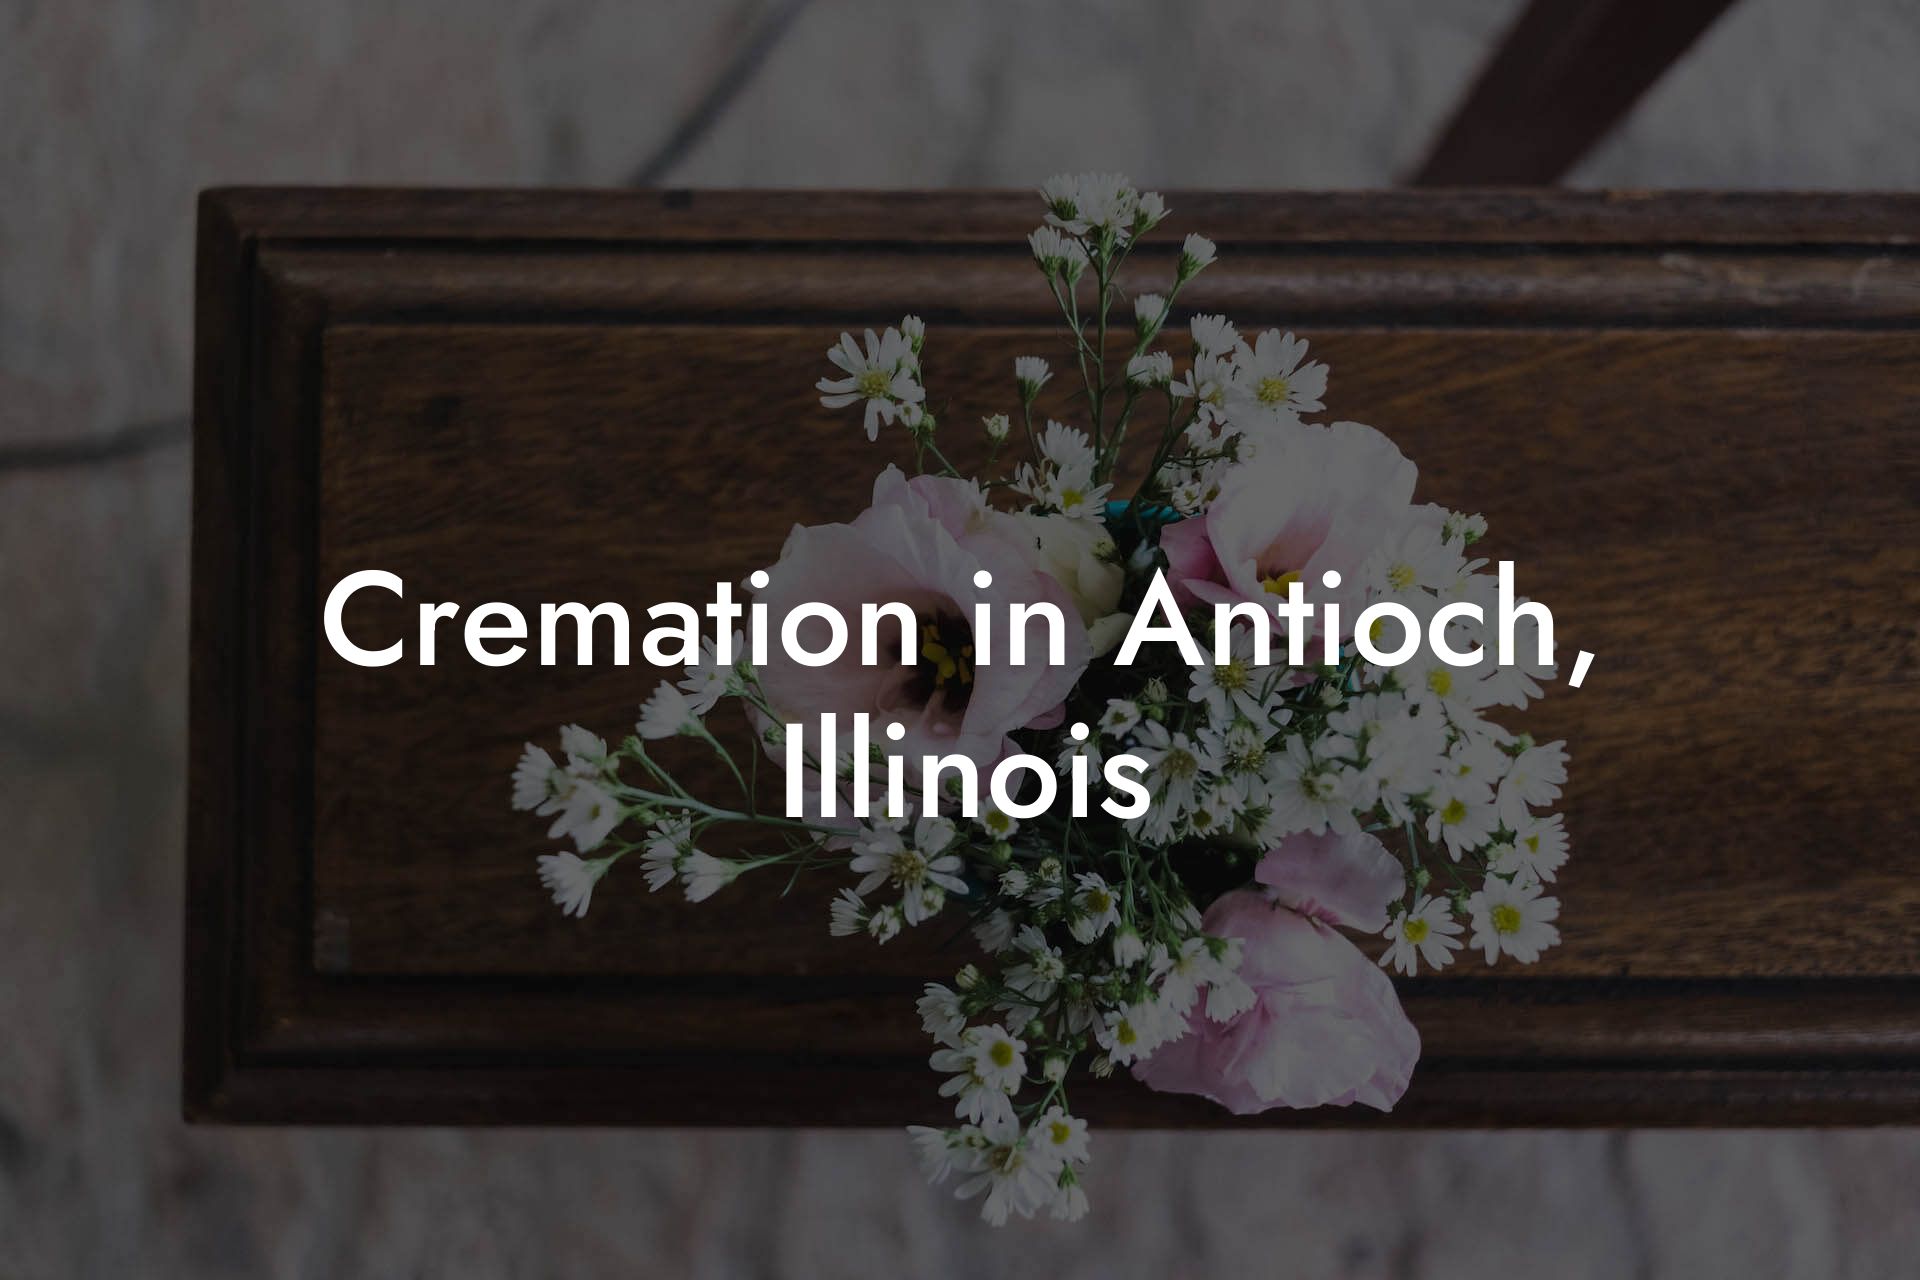 Cremation in Antioch, Illinois